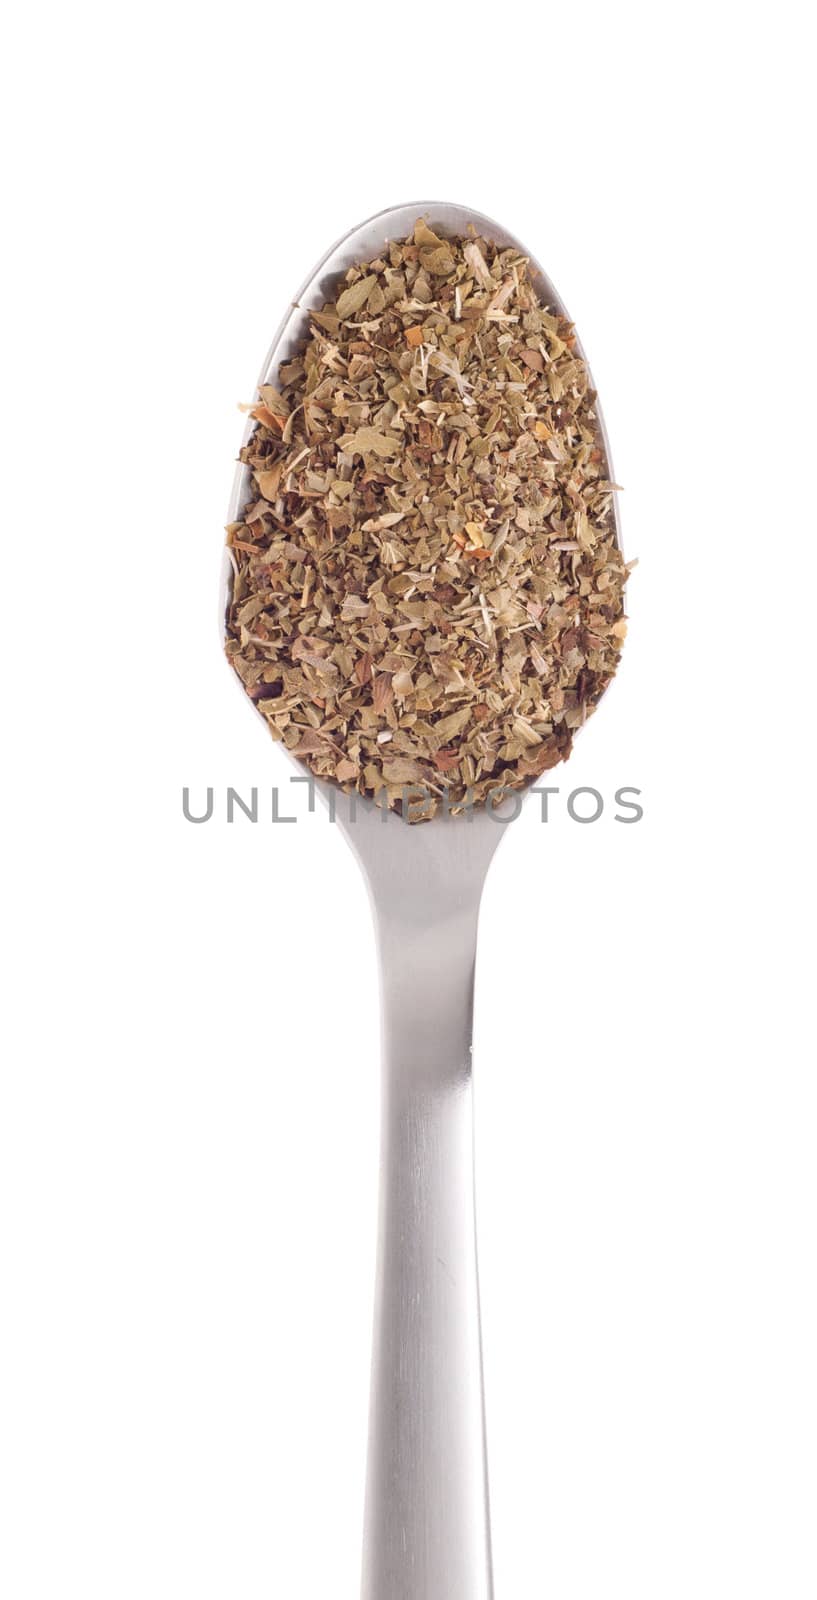 oregano spice on a stainless steel spoon, isolated on white background